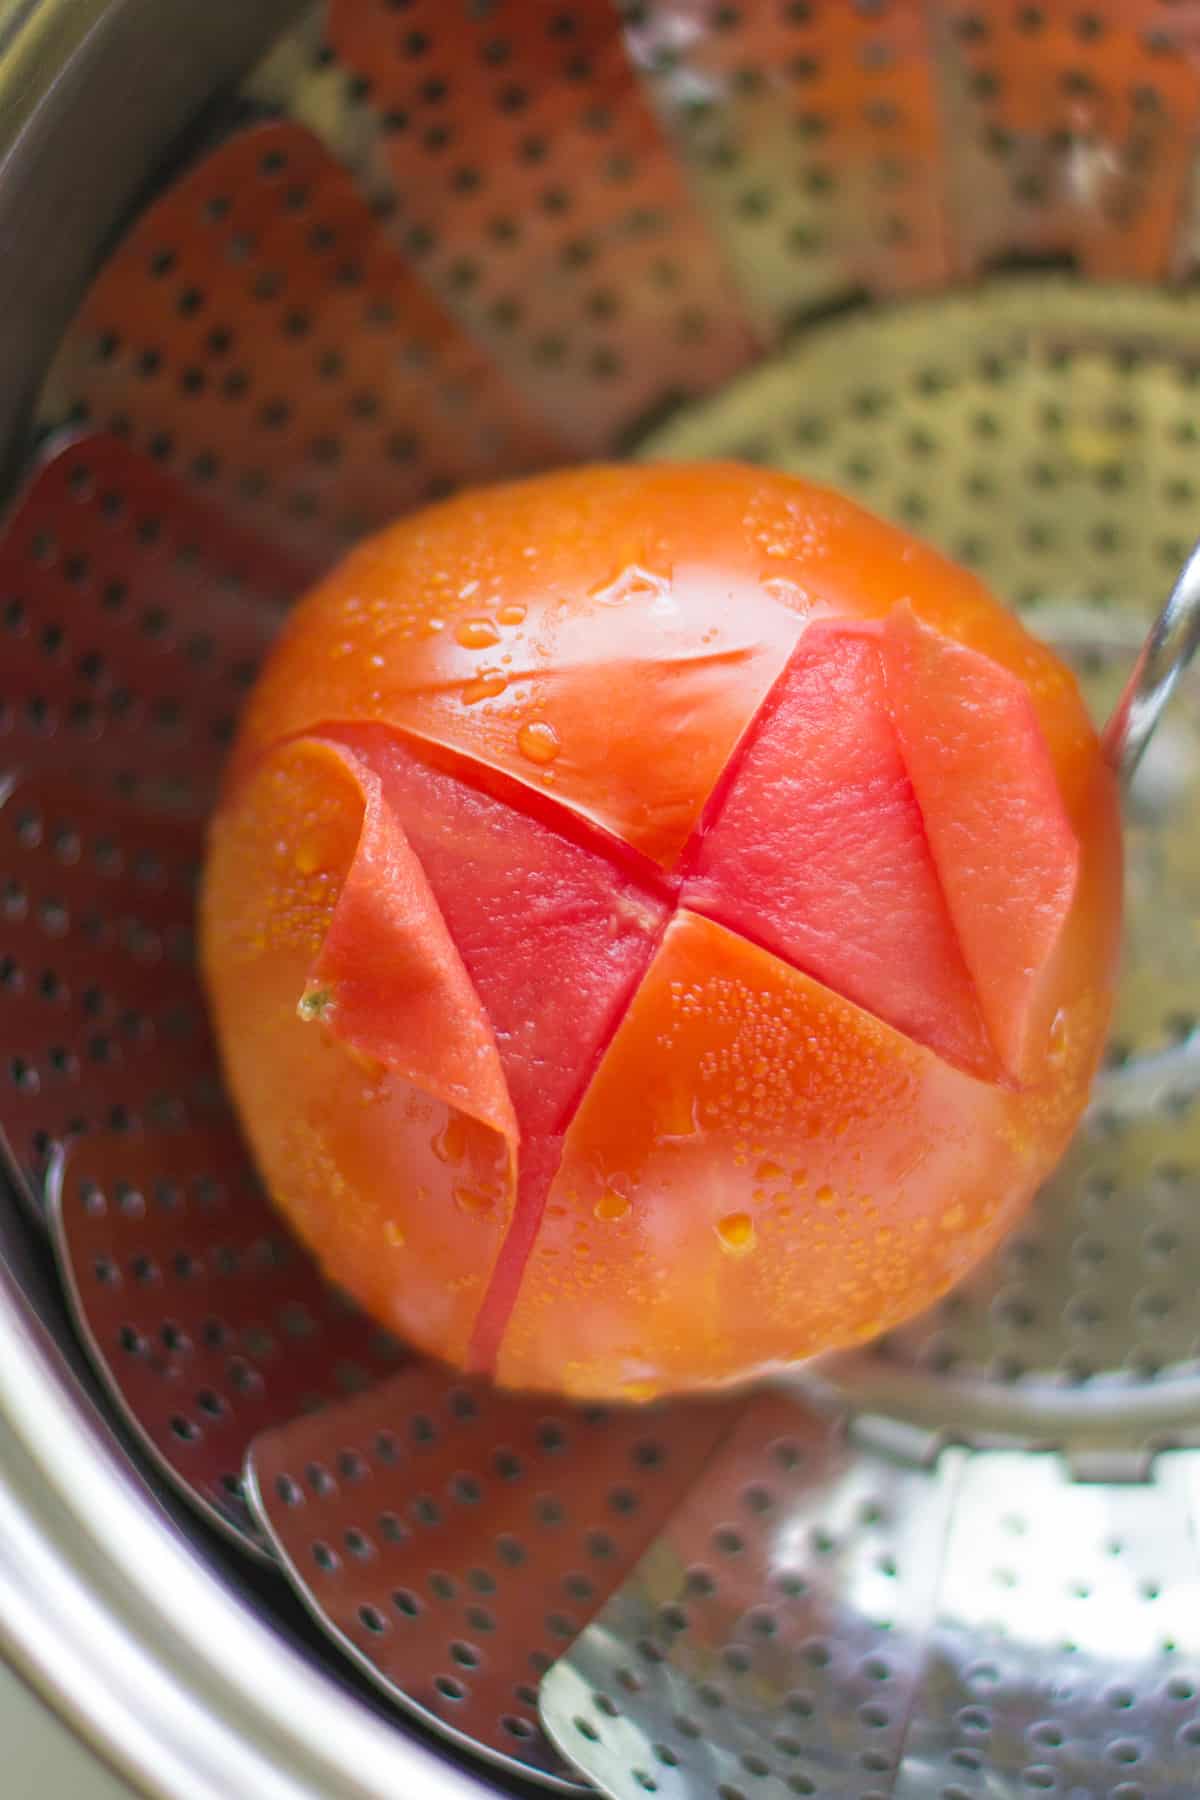 Steamed beefsteak tomato with "x" mark.